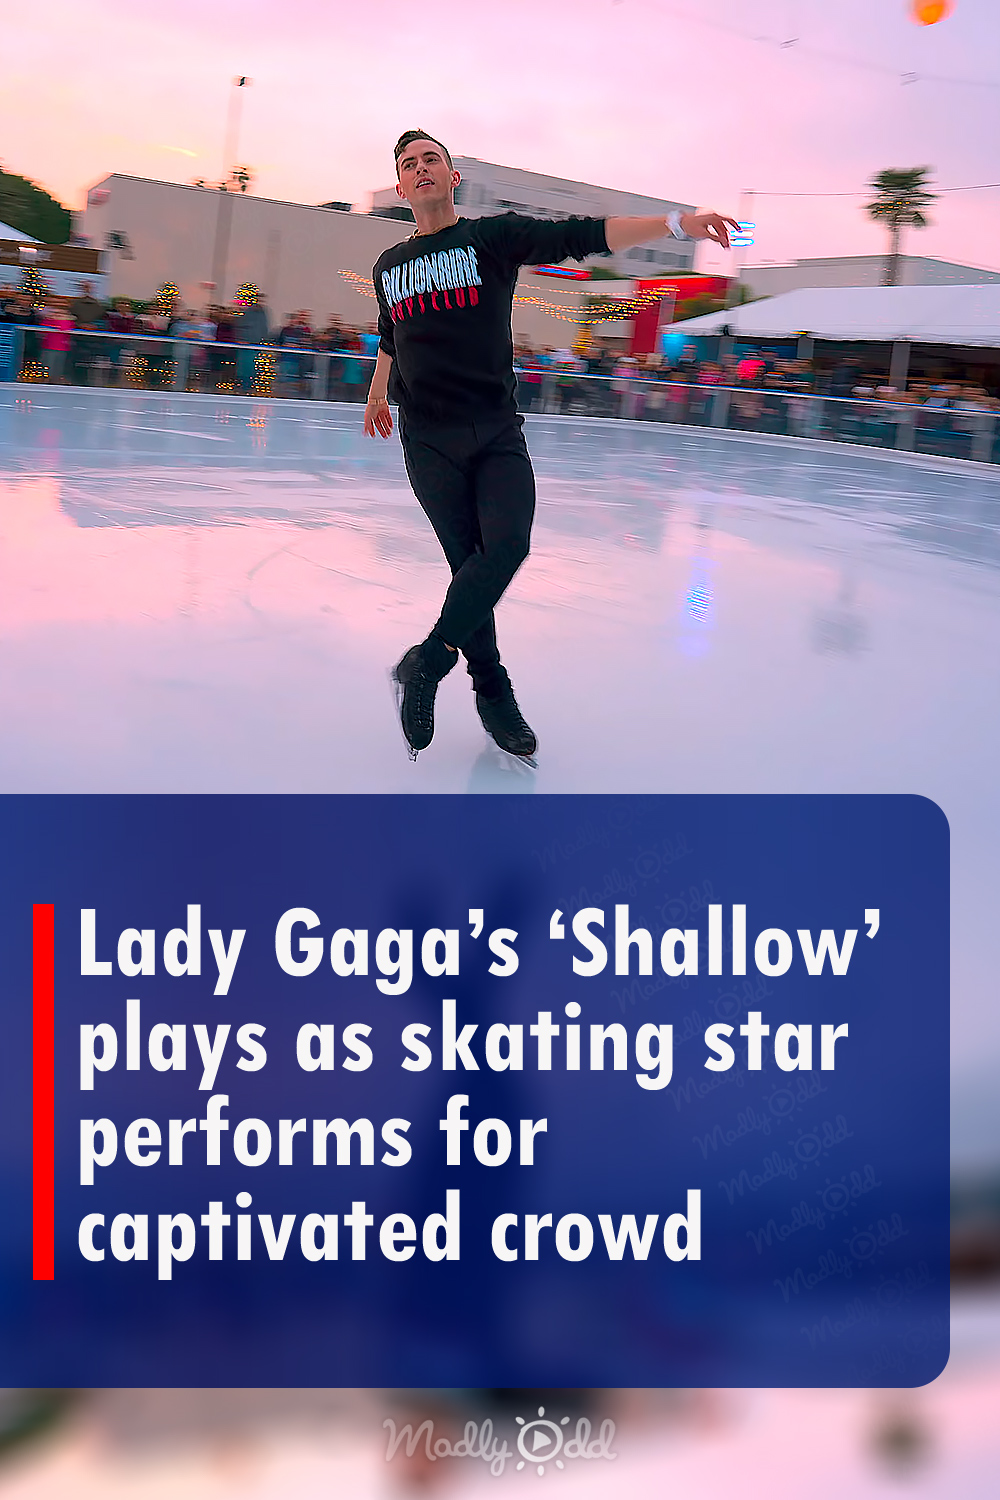 Lady Gaga’s ‘Shallow’ plays as skating star performs for captivated crowd